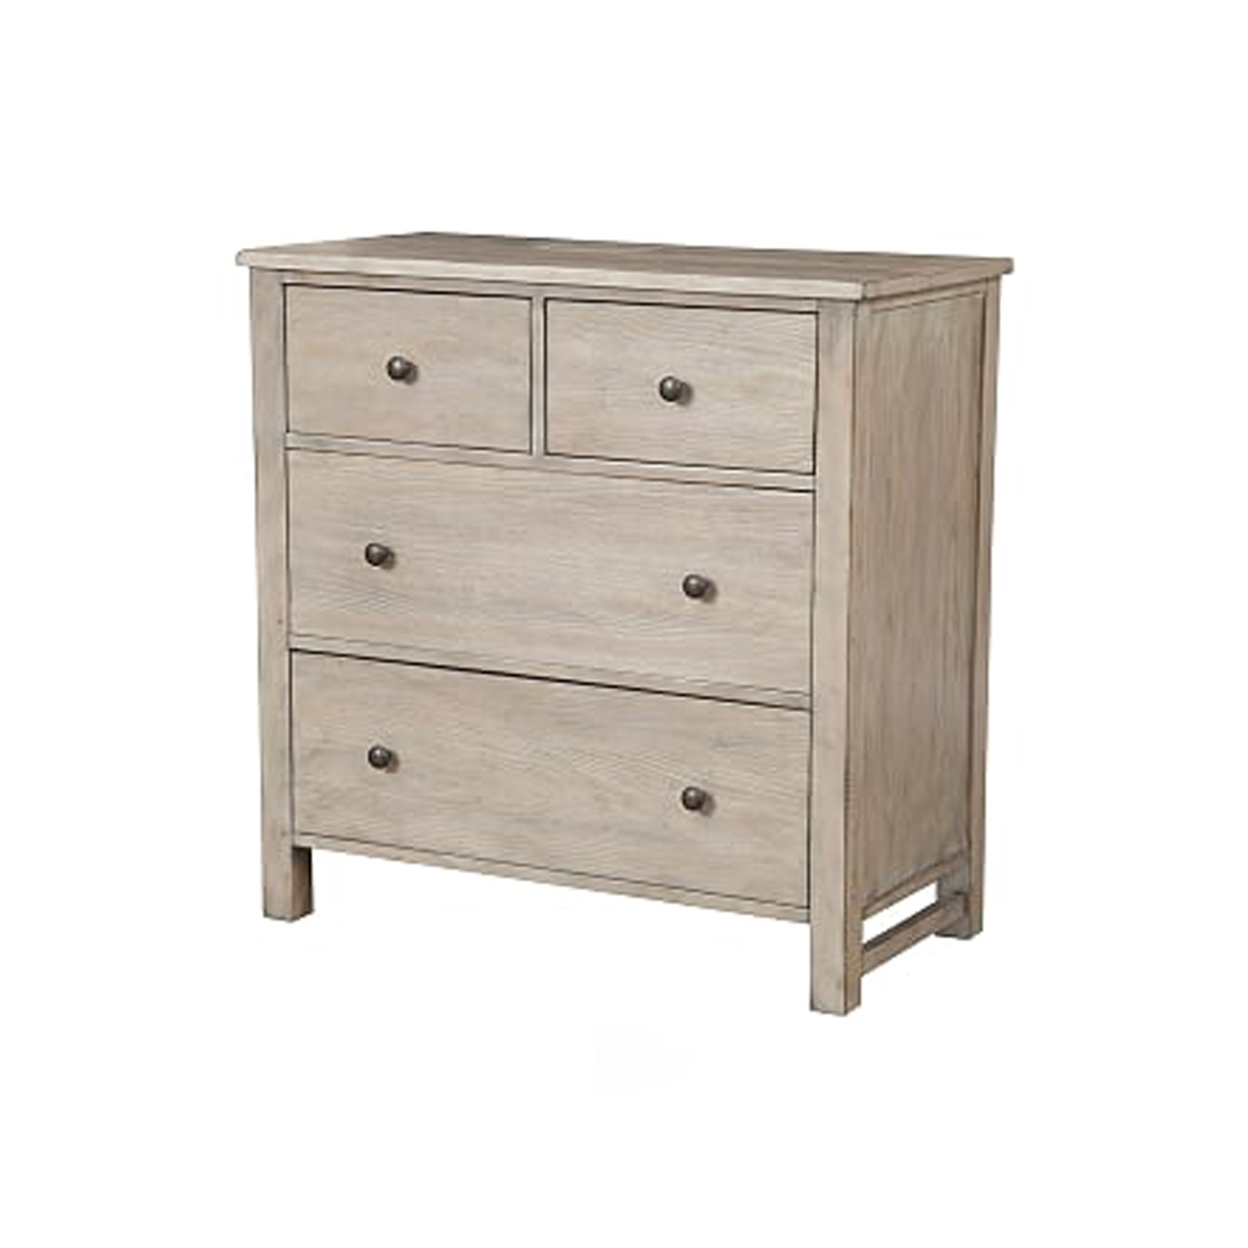 4 Drawer Transitional Style Chest With Wood Grain Details, Gray- Saltoro Sherpi